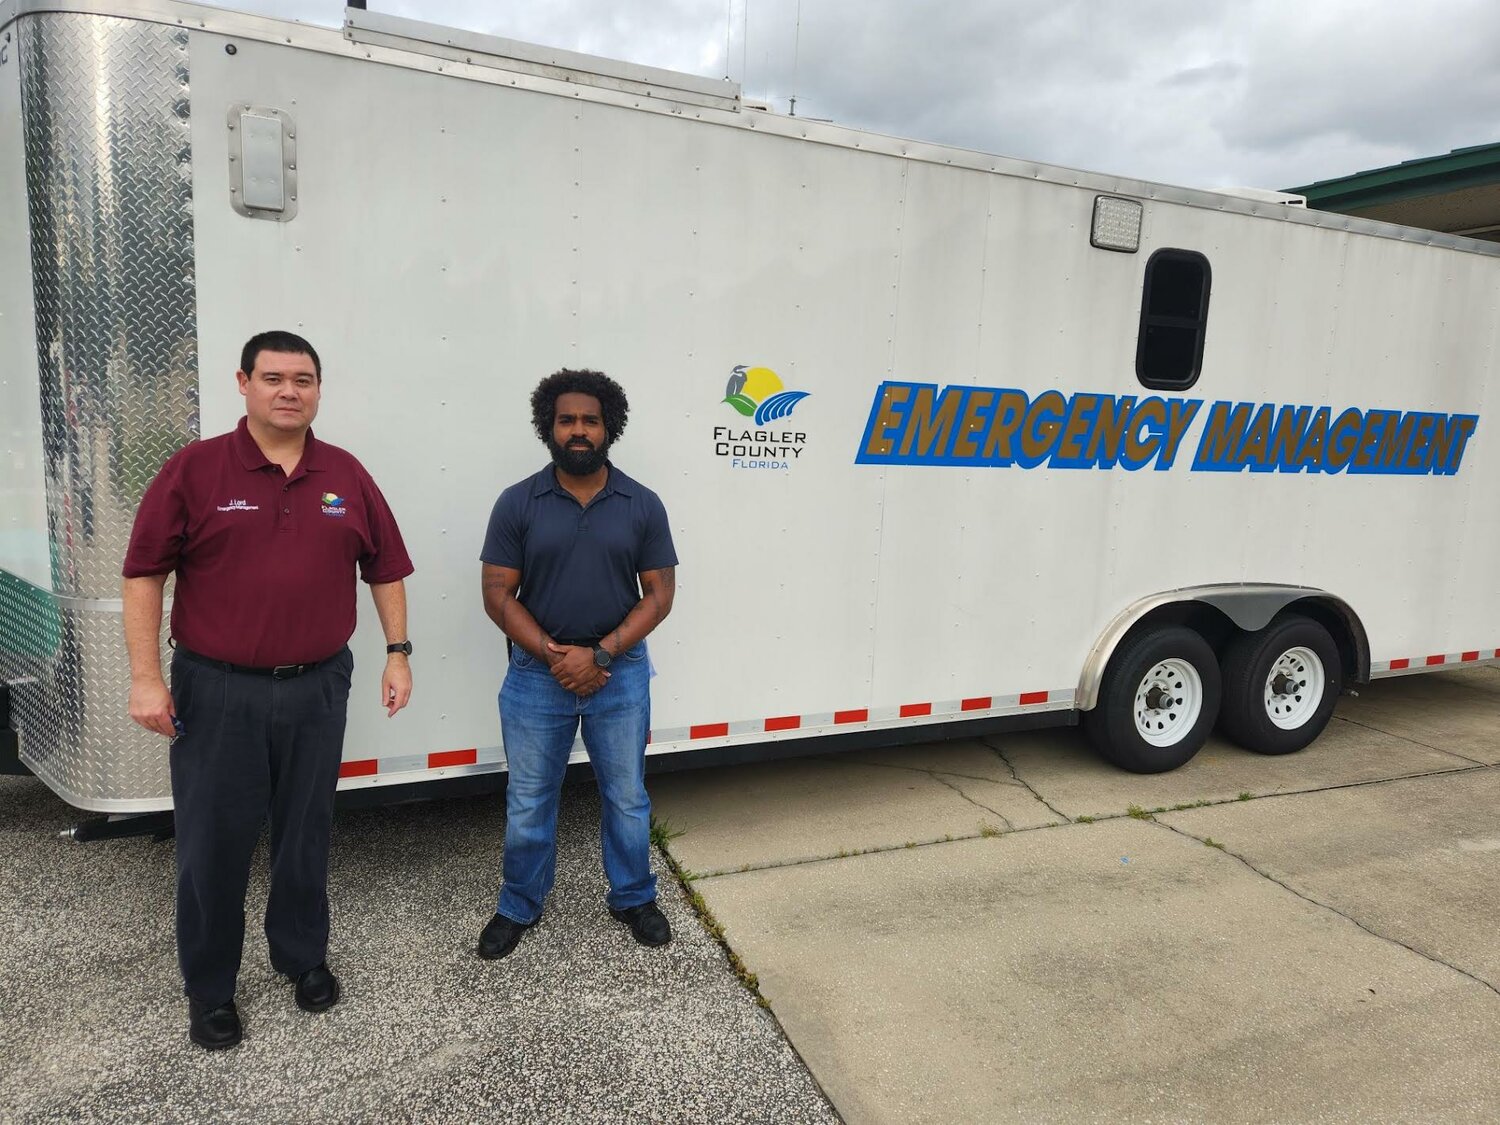 Lord (left) and Joseph (right) are on loan in Madison County to help with recovery efforts.